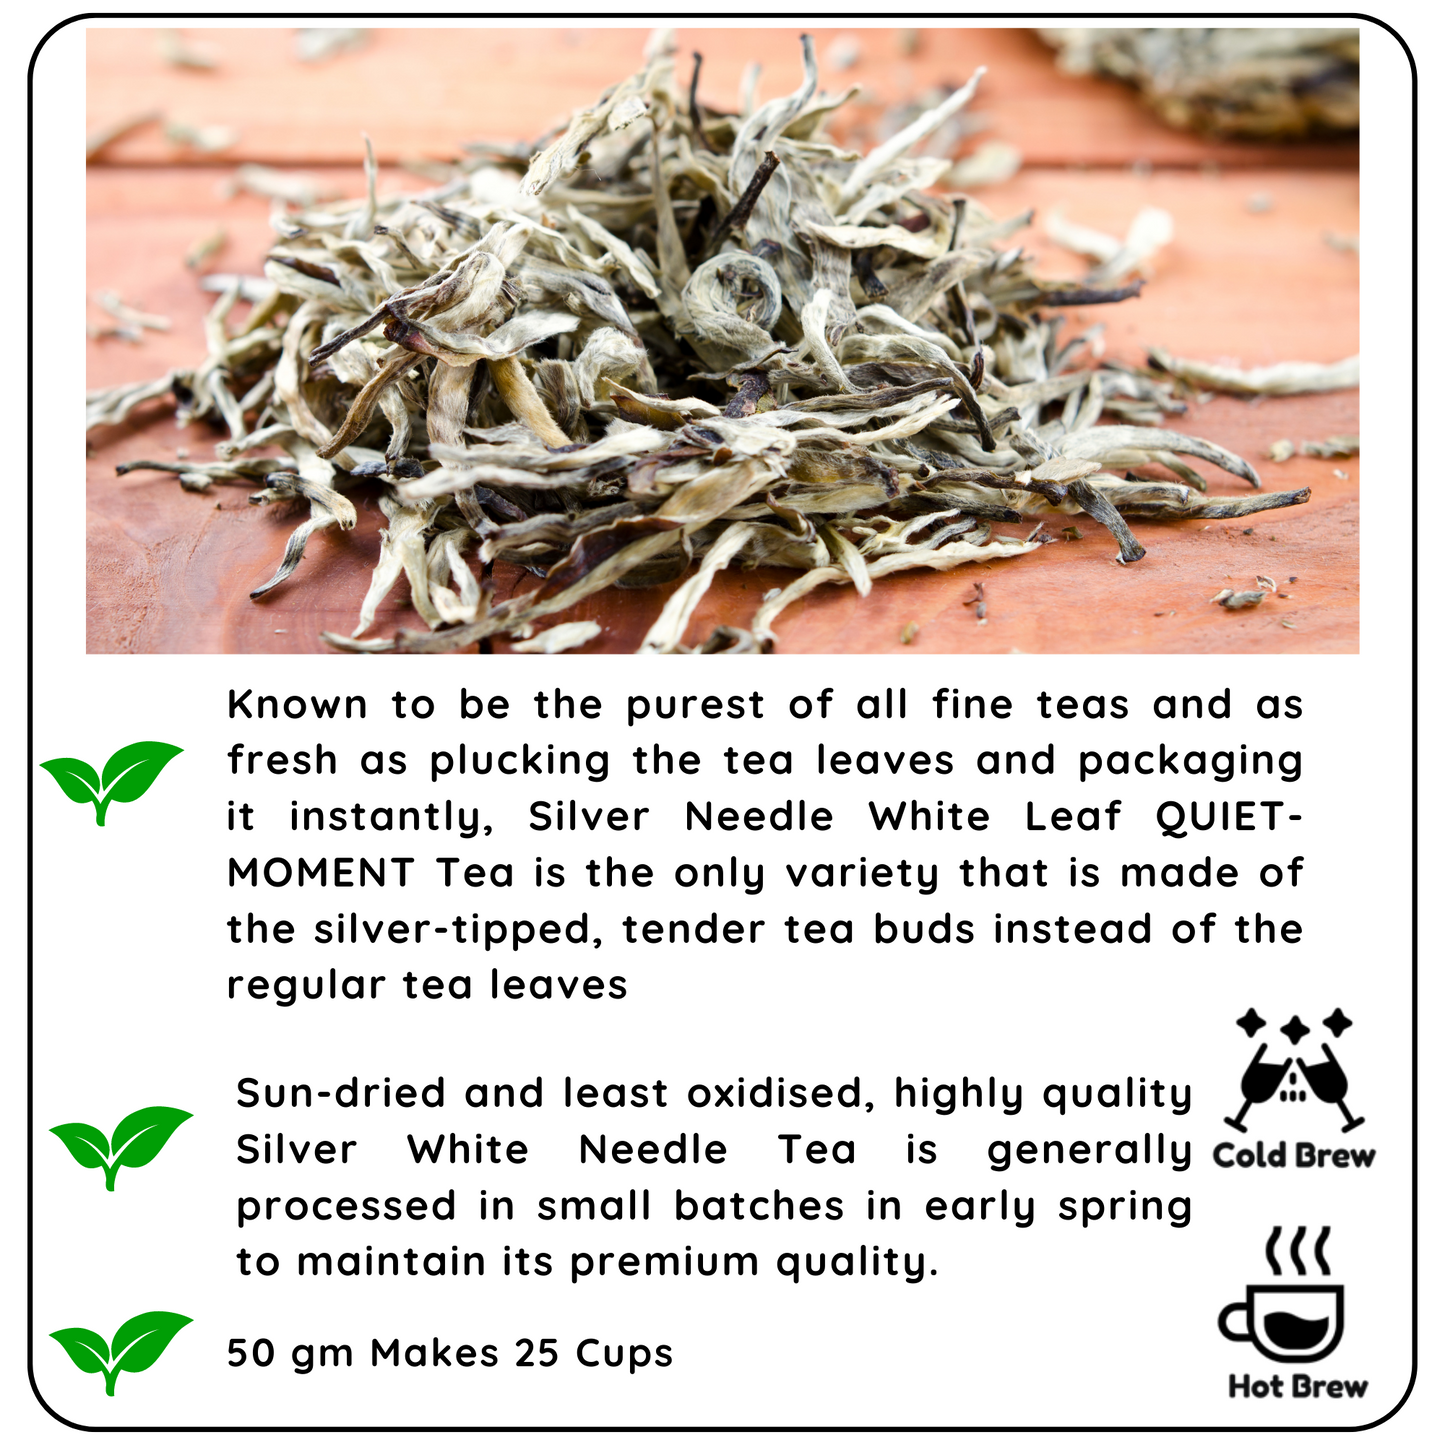 QUIET MOMENT China Silver Needle White Leaf - The Finest and Purest of All Teas - Radhikas Fine Teas and Whatnots